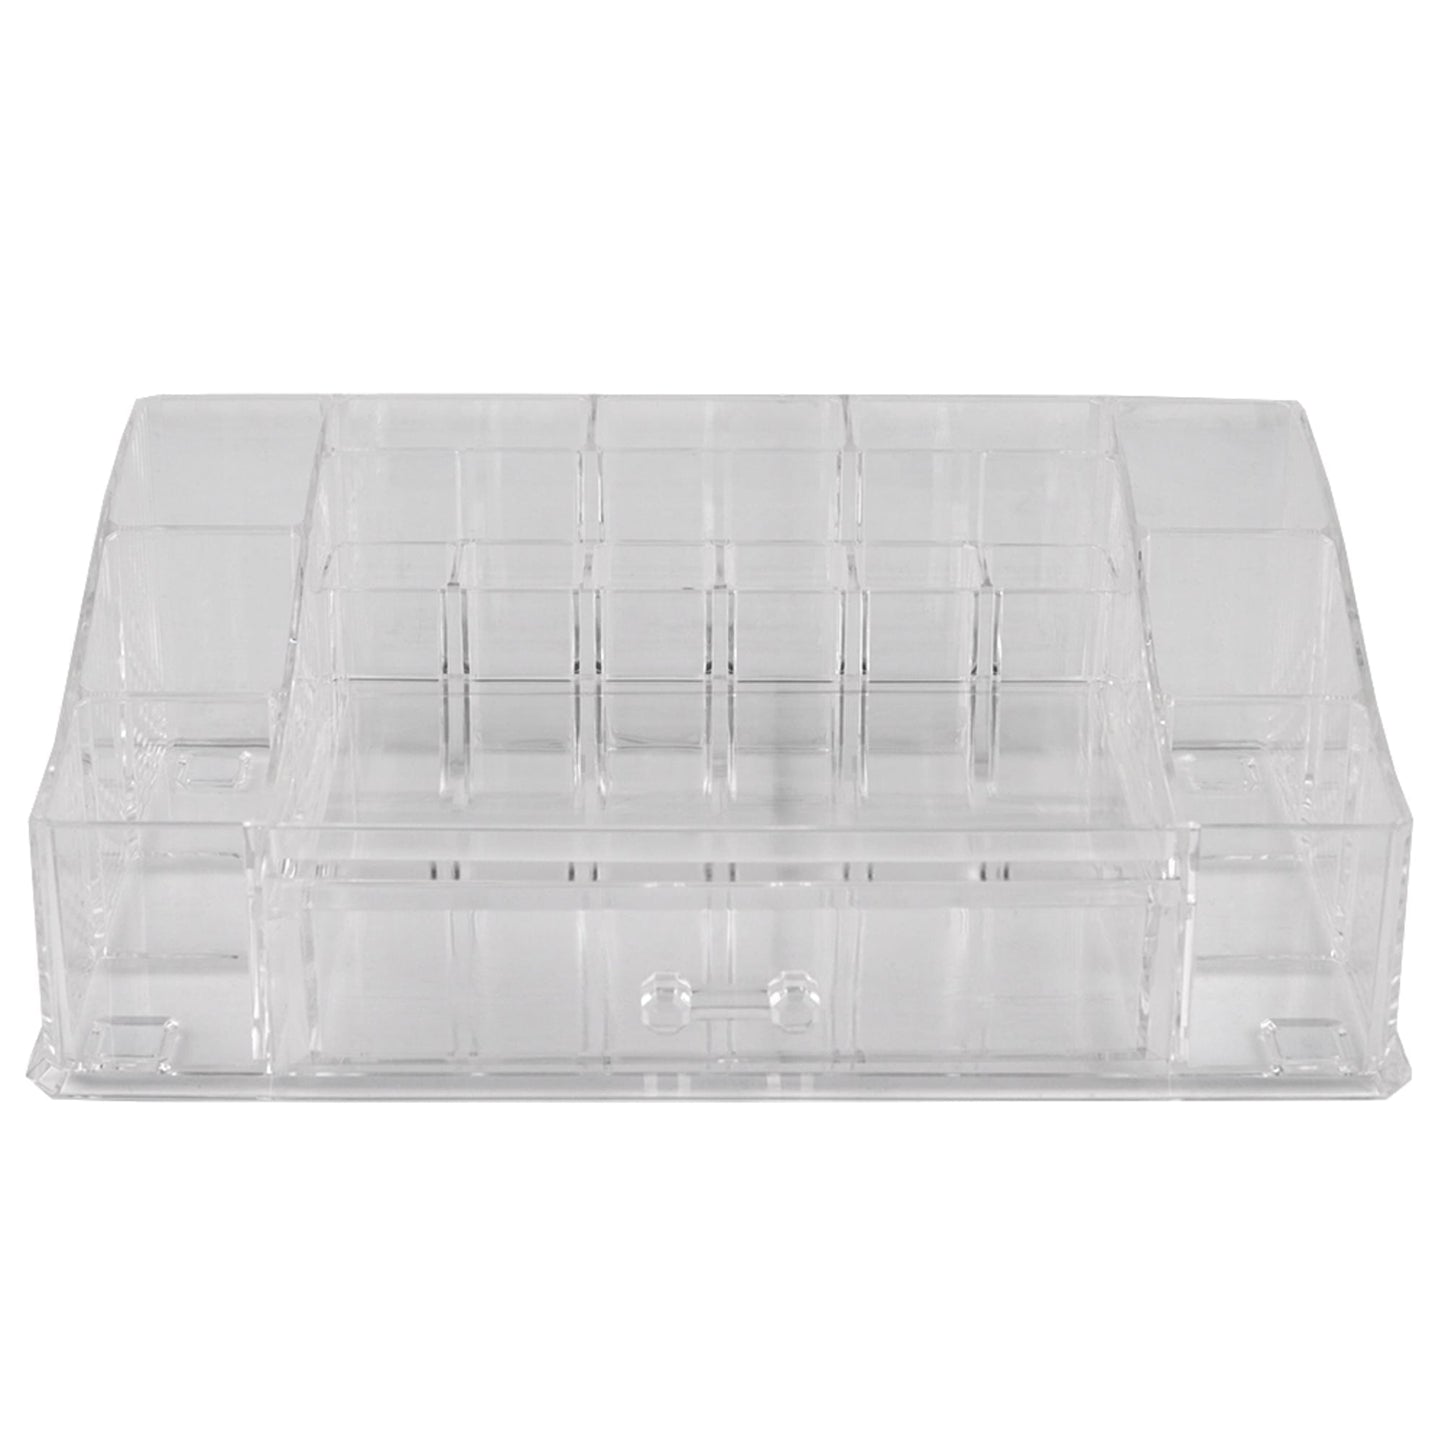 Deluxe Large Shatter-Resistant Plastic Mult-Compartment Cosmetic Organizer with Easy Open Drawer, Clear